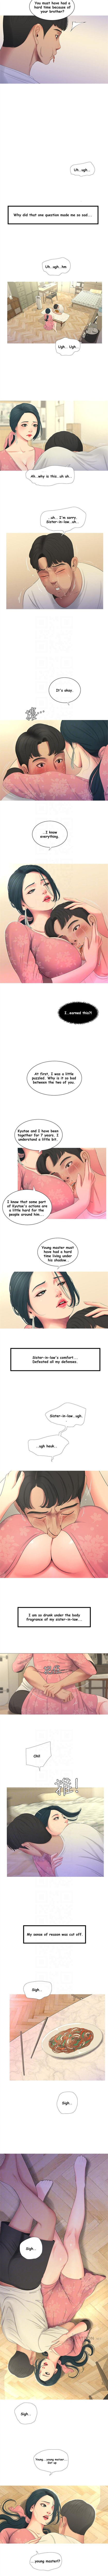 One's In-Laws Virgins Chapter 1-7 (Ongoing) [English] 31